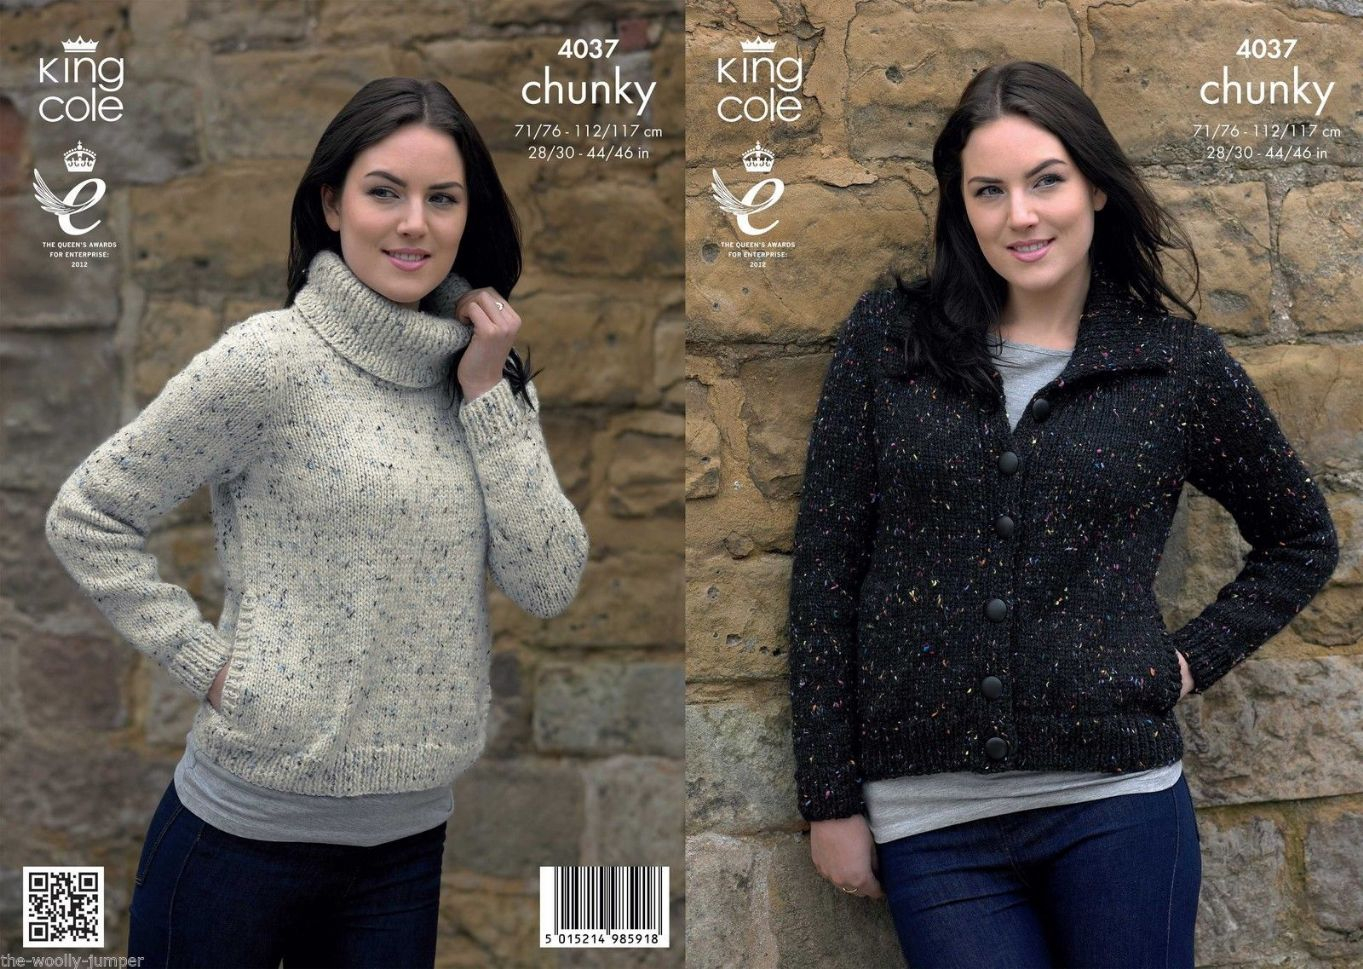 Tweed Knitting Patterns 4037 King Cole Chunky Tweed Cardigan Jacket Sweater Knitting Pattern To Fit Chest 28 To 46